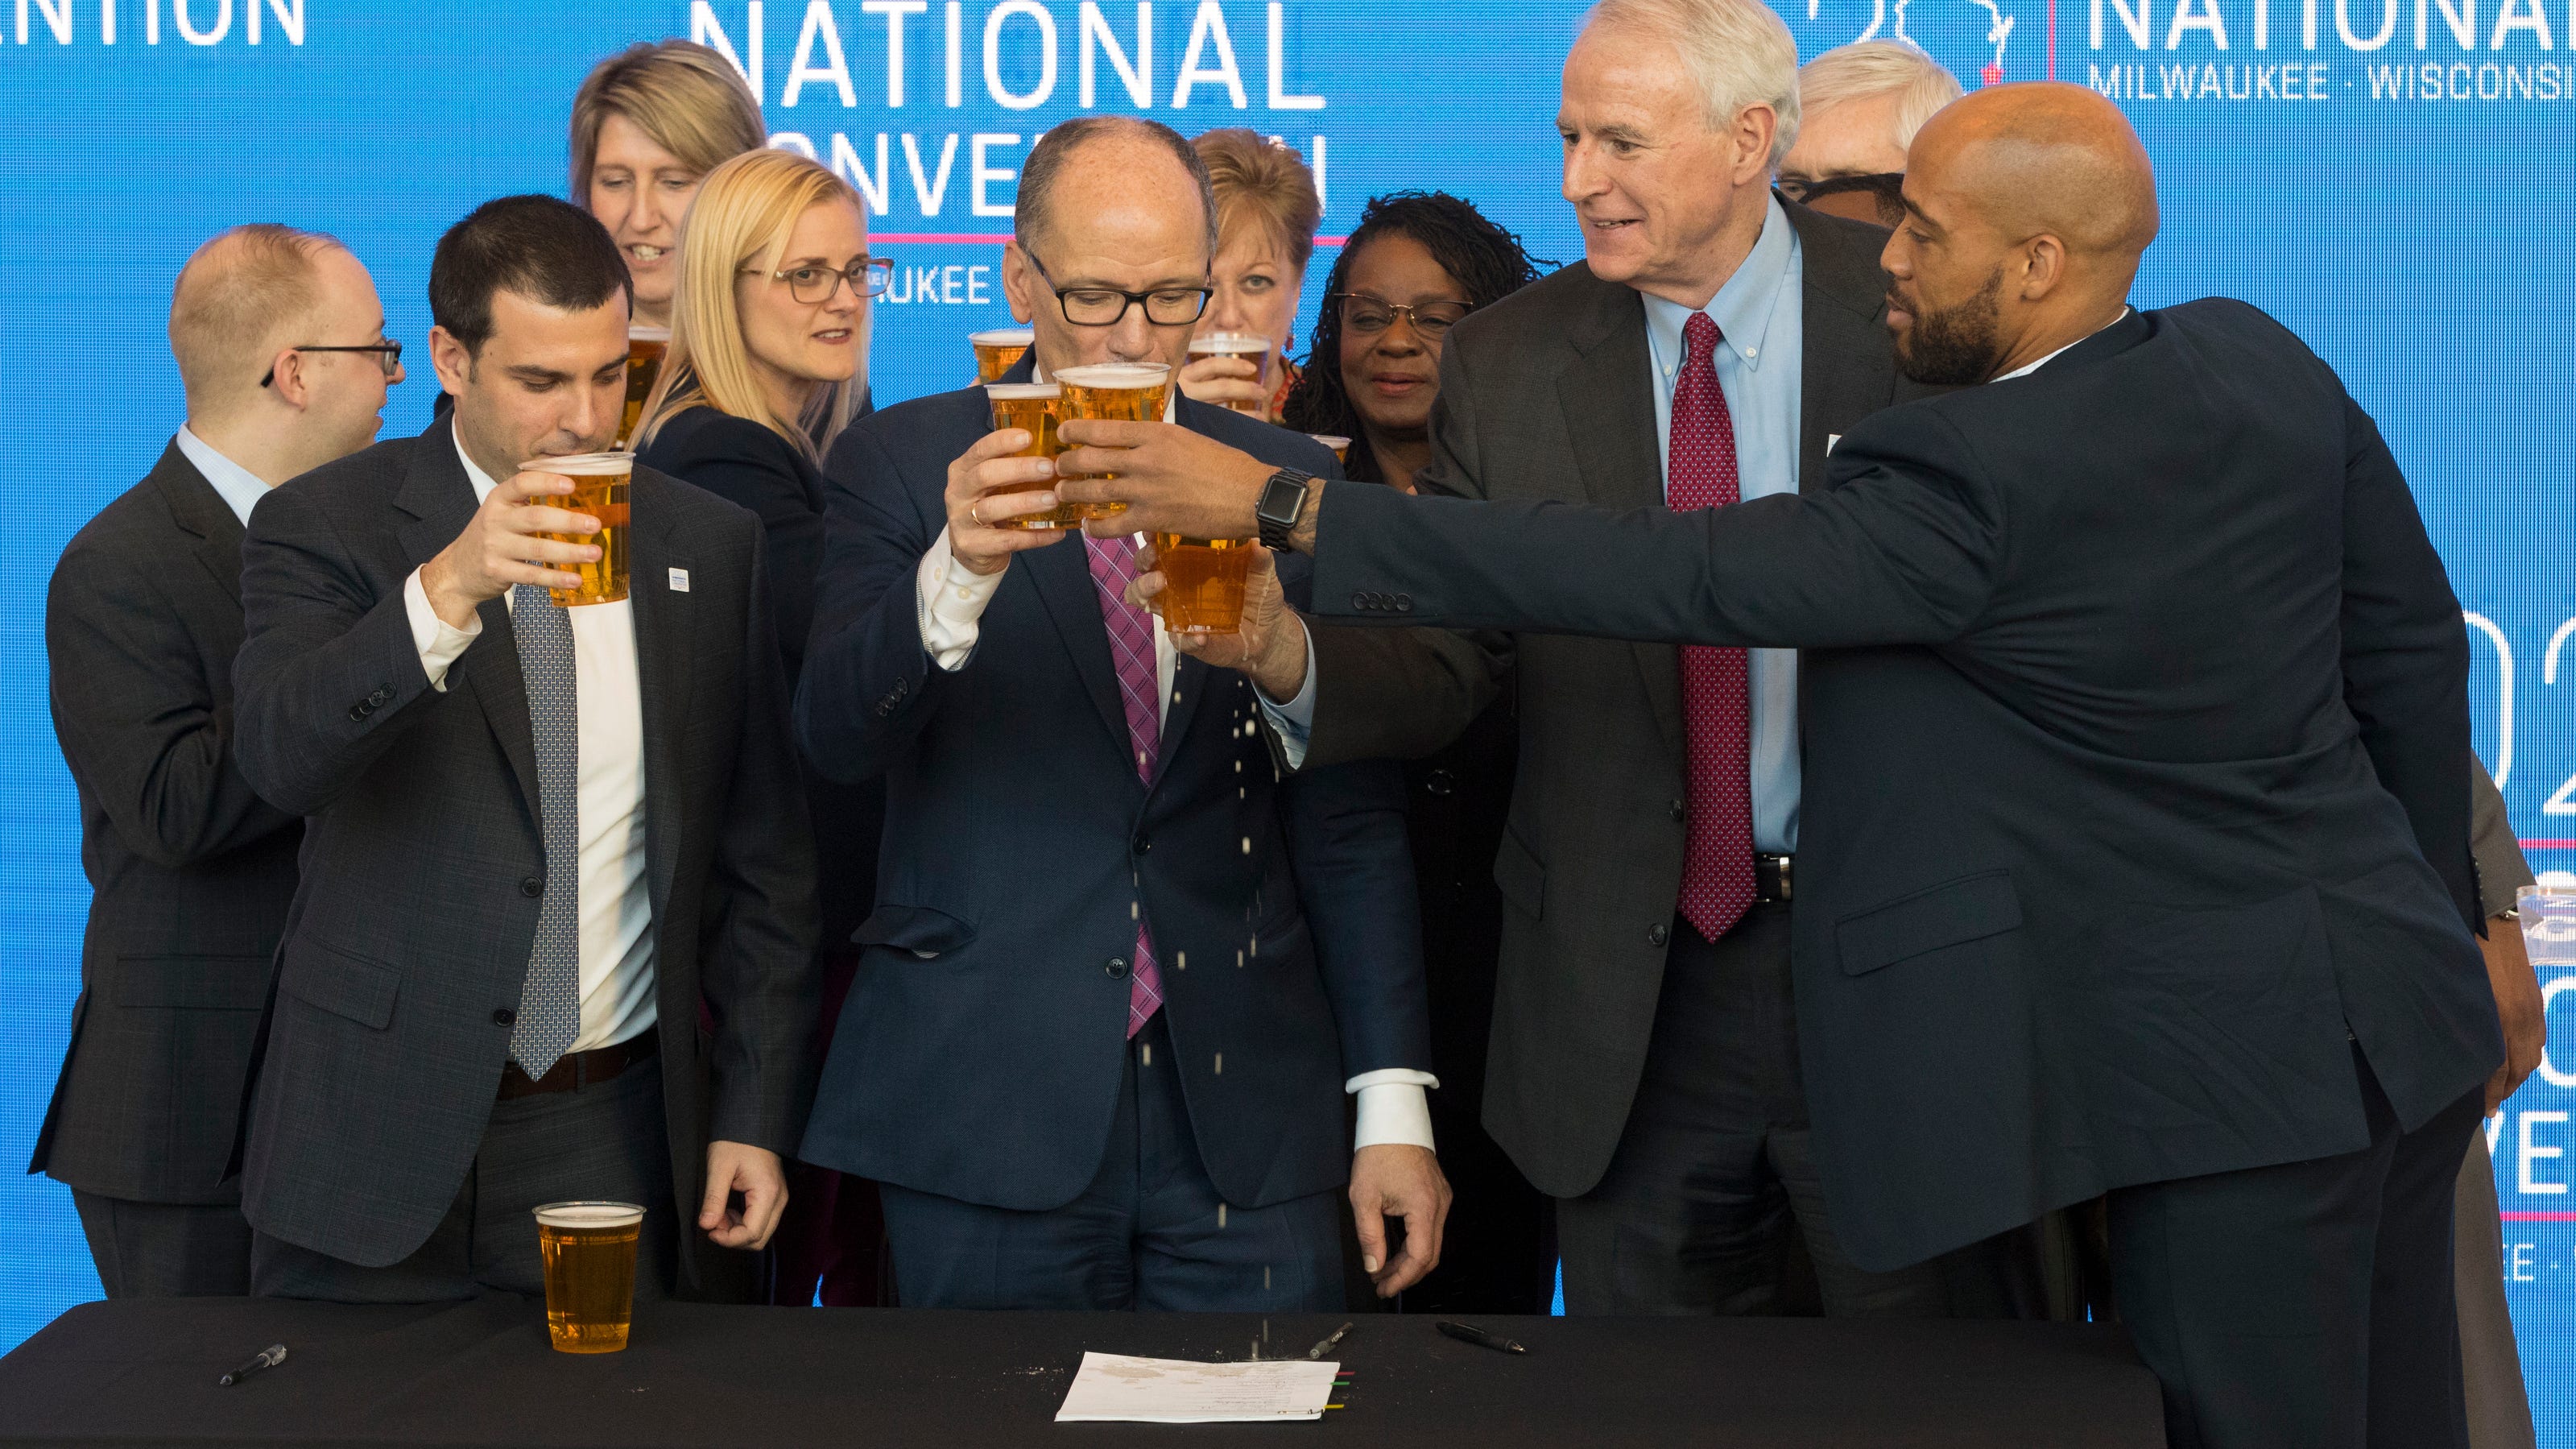 Democratic National Committee Chairman Tom Perez (center) reacts after spilling a celebratory beer on the convention contract with Milwaukee Bucks Senior Vice President Alex Lasry (left), Milwaukee Mayor Tom Barrett and Lt.  Gov. Mandela Barnes following the official announcement that Milwaukee will host the 2020 Democratic National Convention at Fiserv Forum on Monday. Milwaukee snagged the event over Houston and Miami.